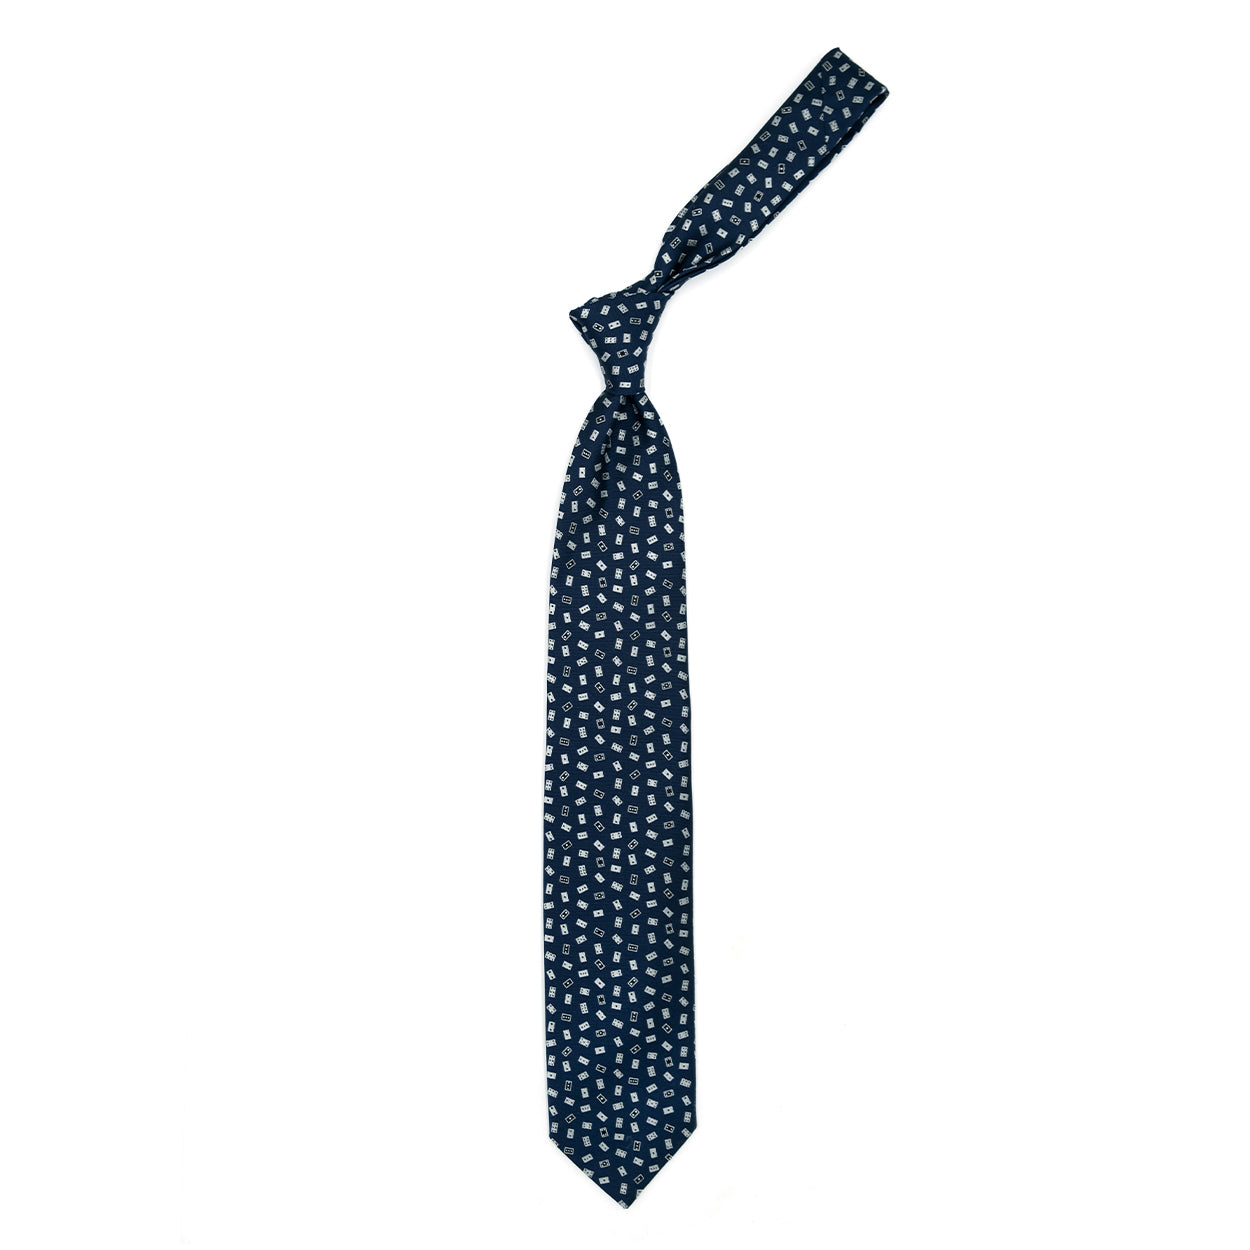 Blue tie with Domino tiles